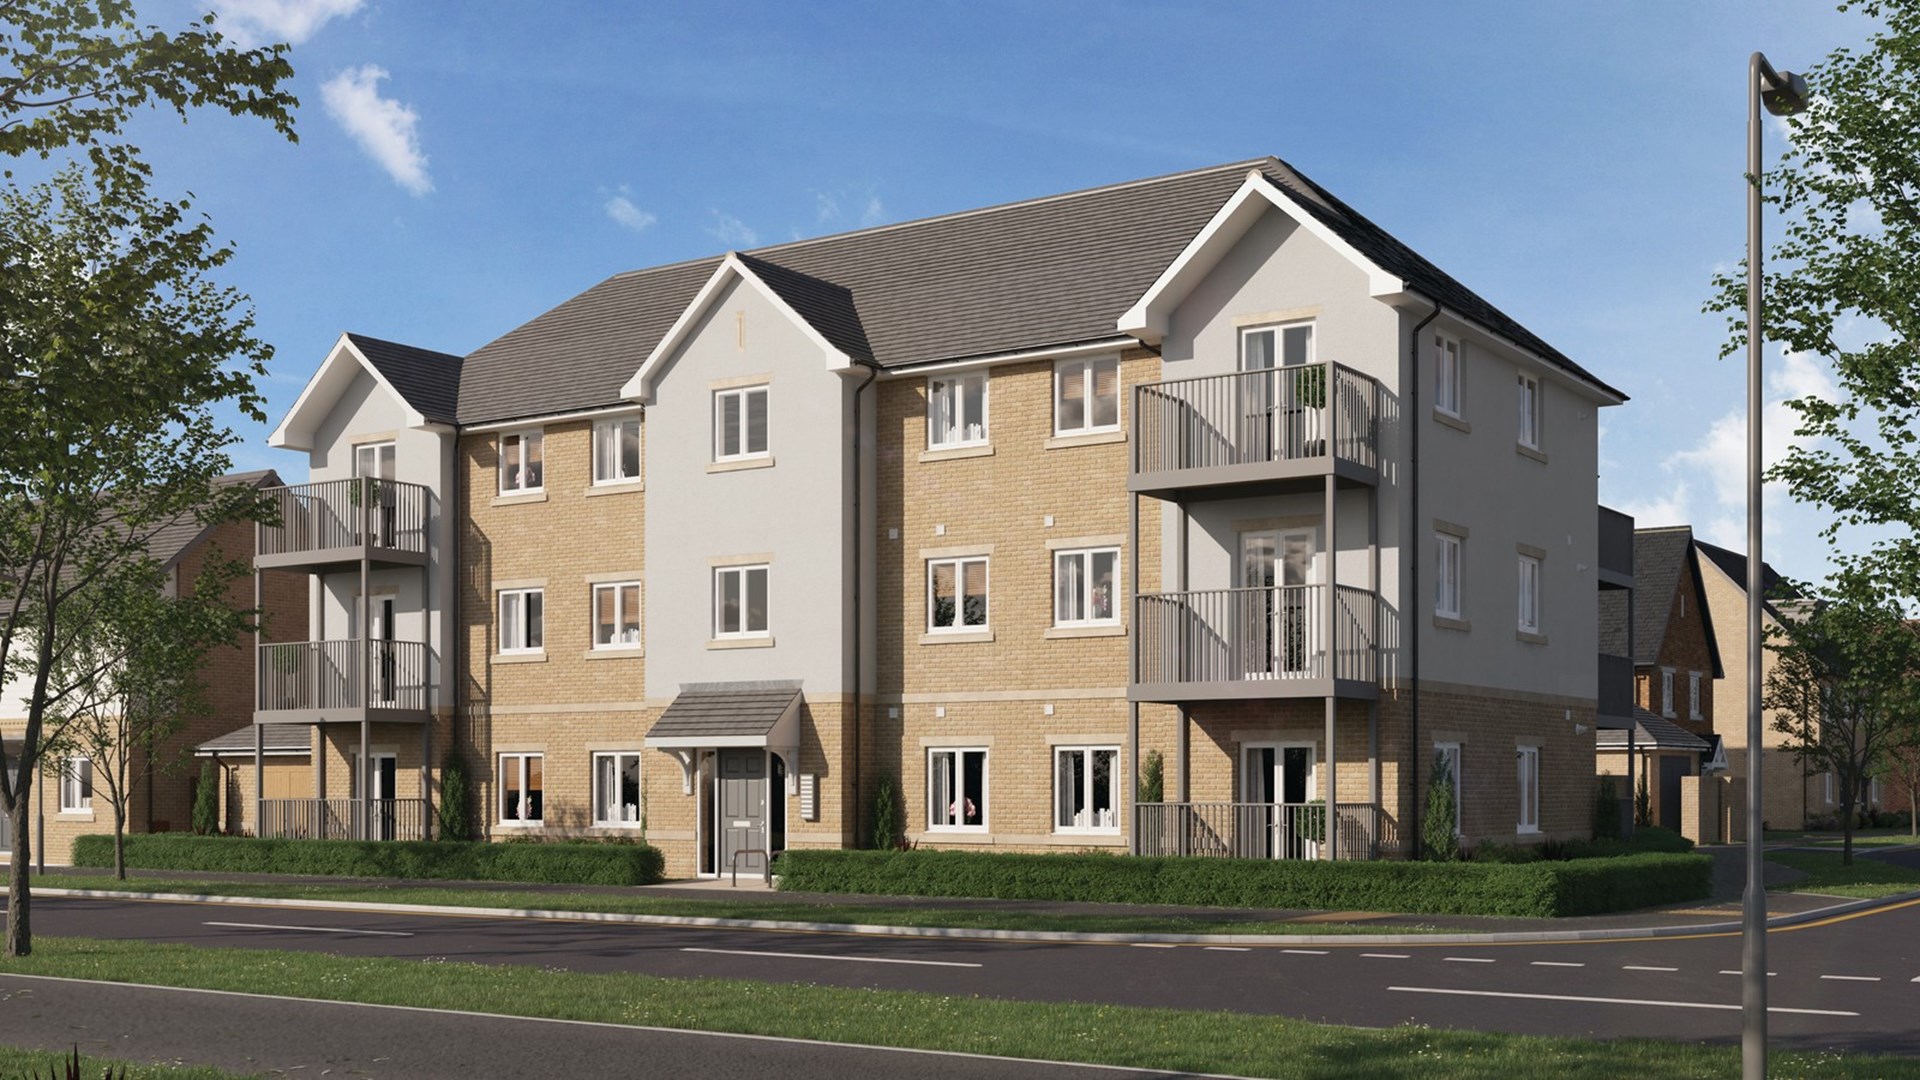 Property 2 of 10. Nobel Park Phase 4, Didcot